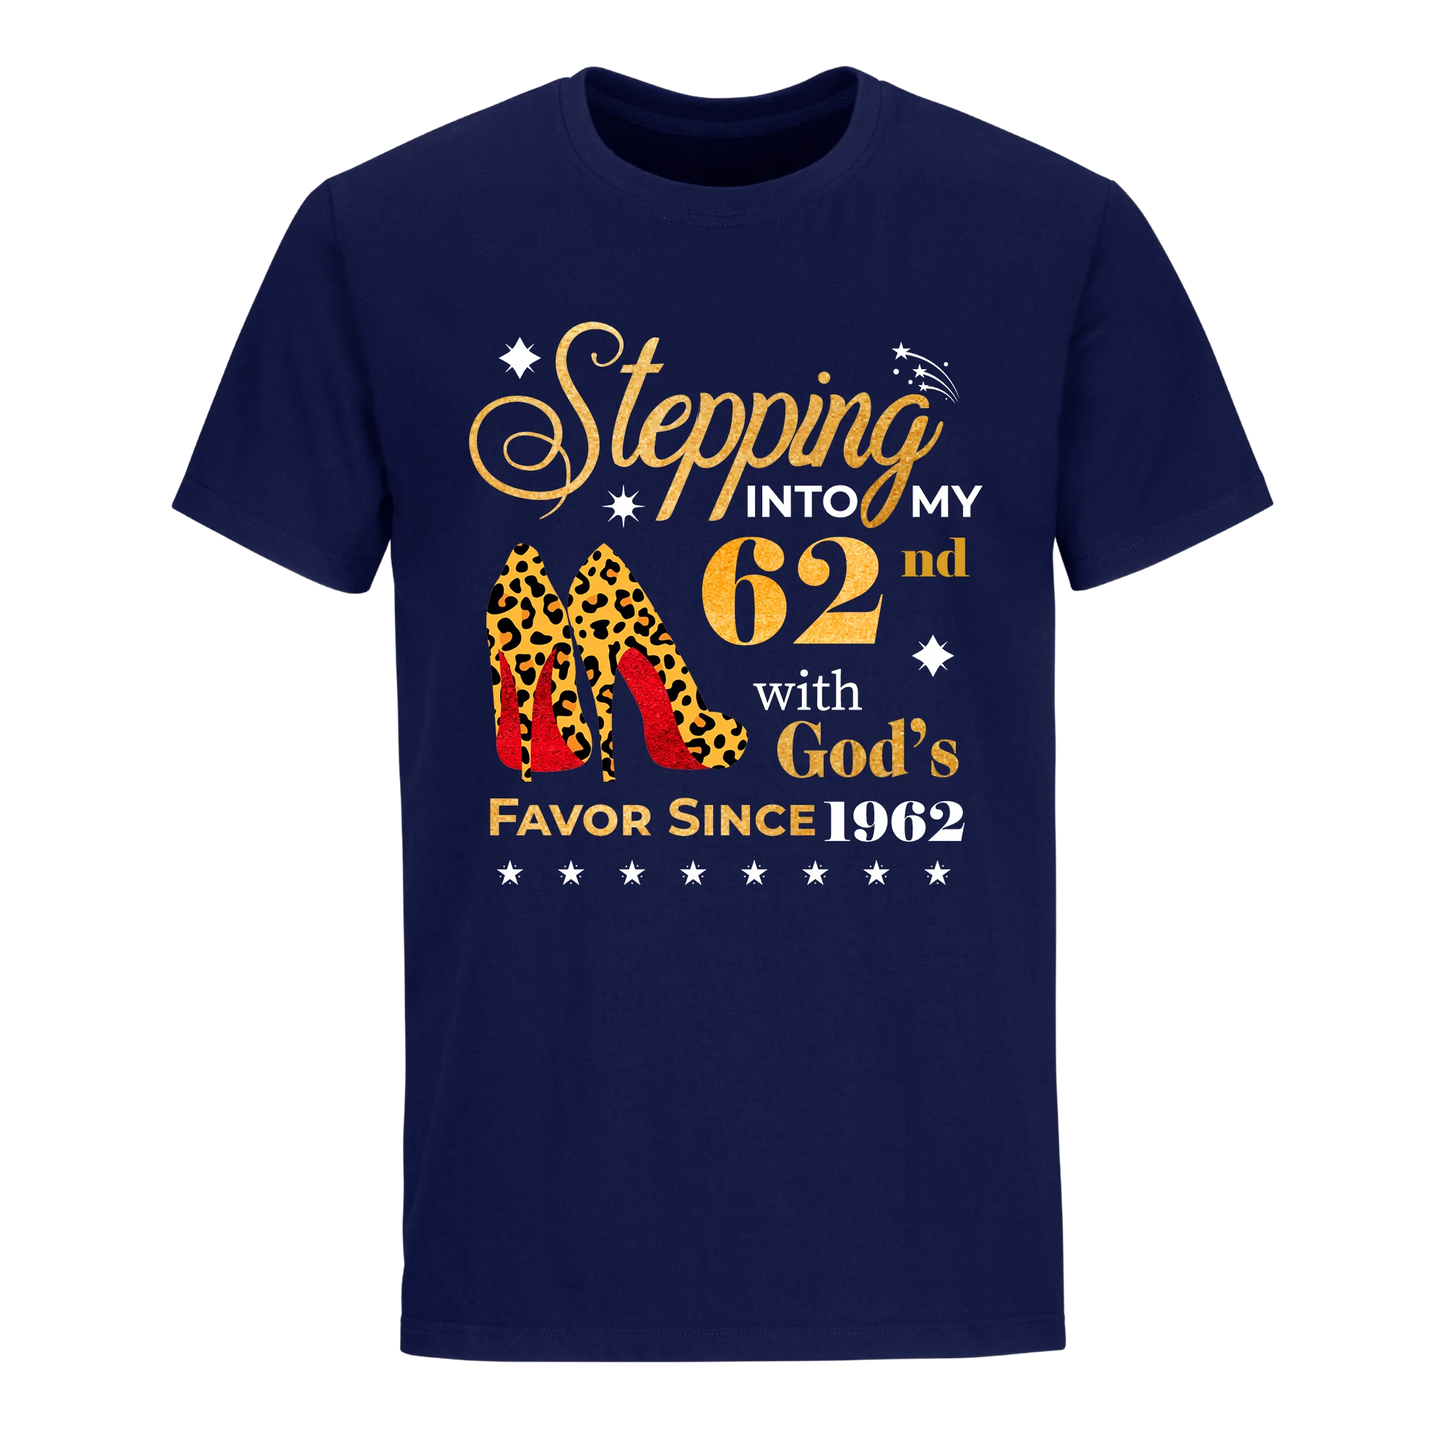 STEPPING INTO MY 62ND WITH GOD'S FAVOR SINCE 1962 UNISEX SHIRT